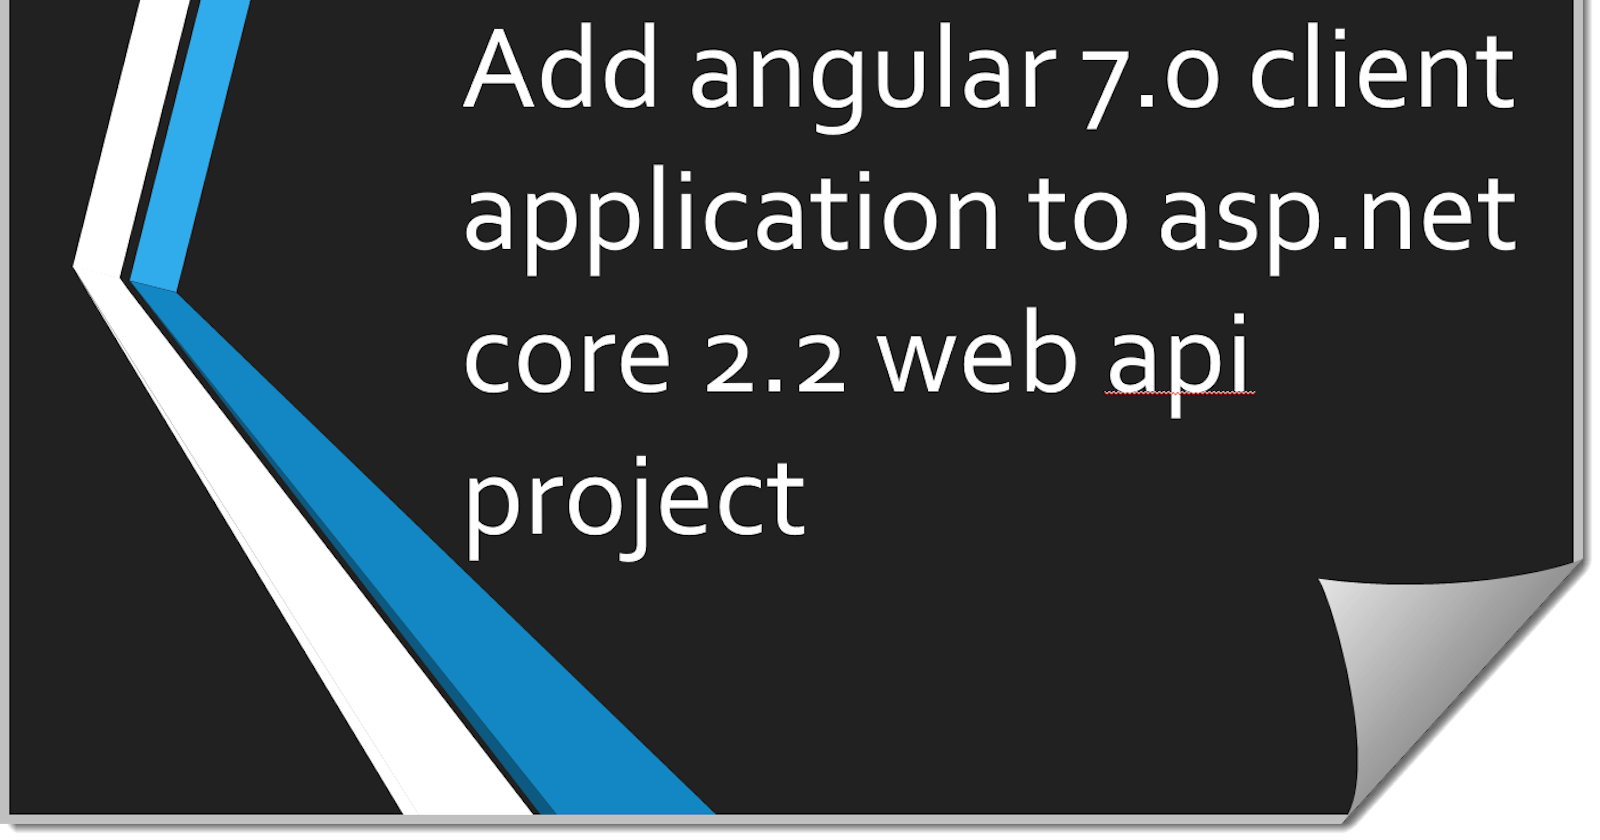 Add angular 7.0 client application to asp.net core 2.2 web api project